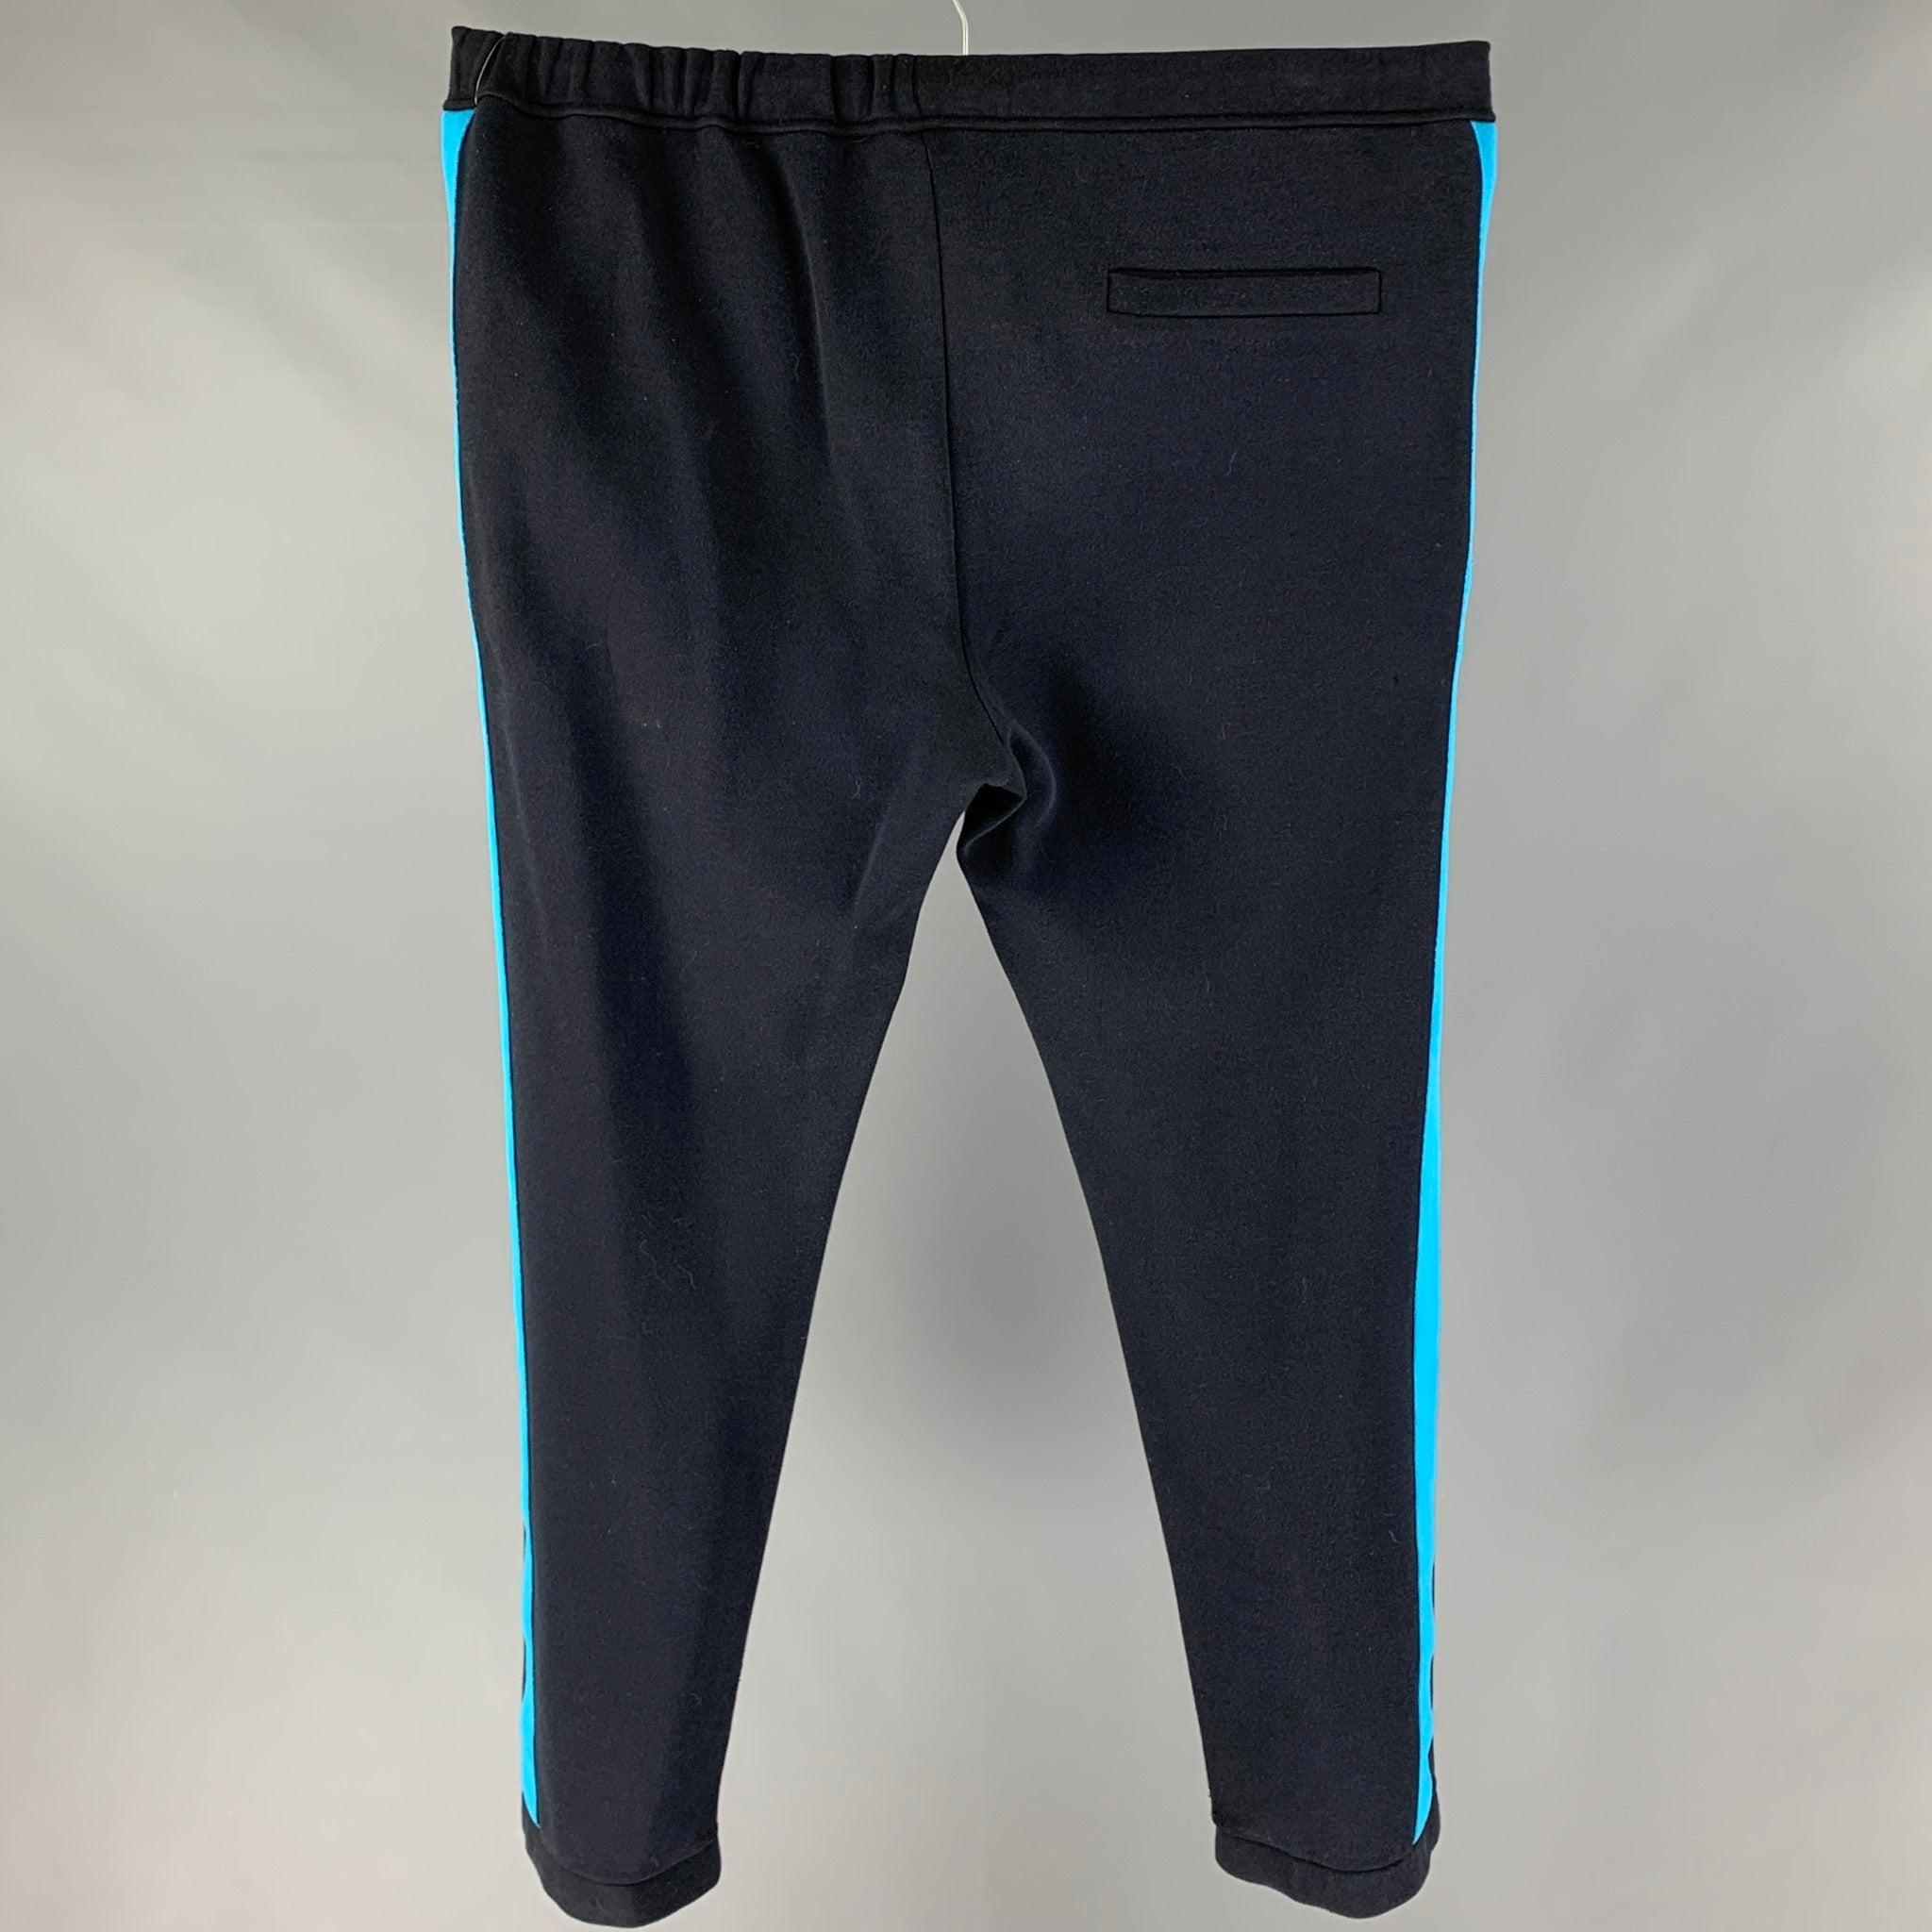 FENDI Size 36 Navy Blue Stripe Cotton Blend Sweatpants In Good Condition For Sale In San Francisco, CA